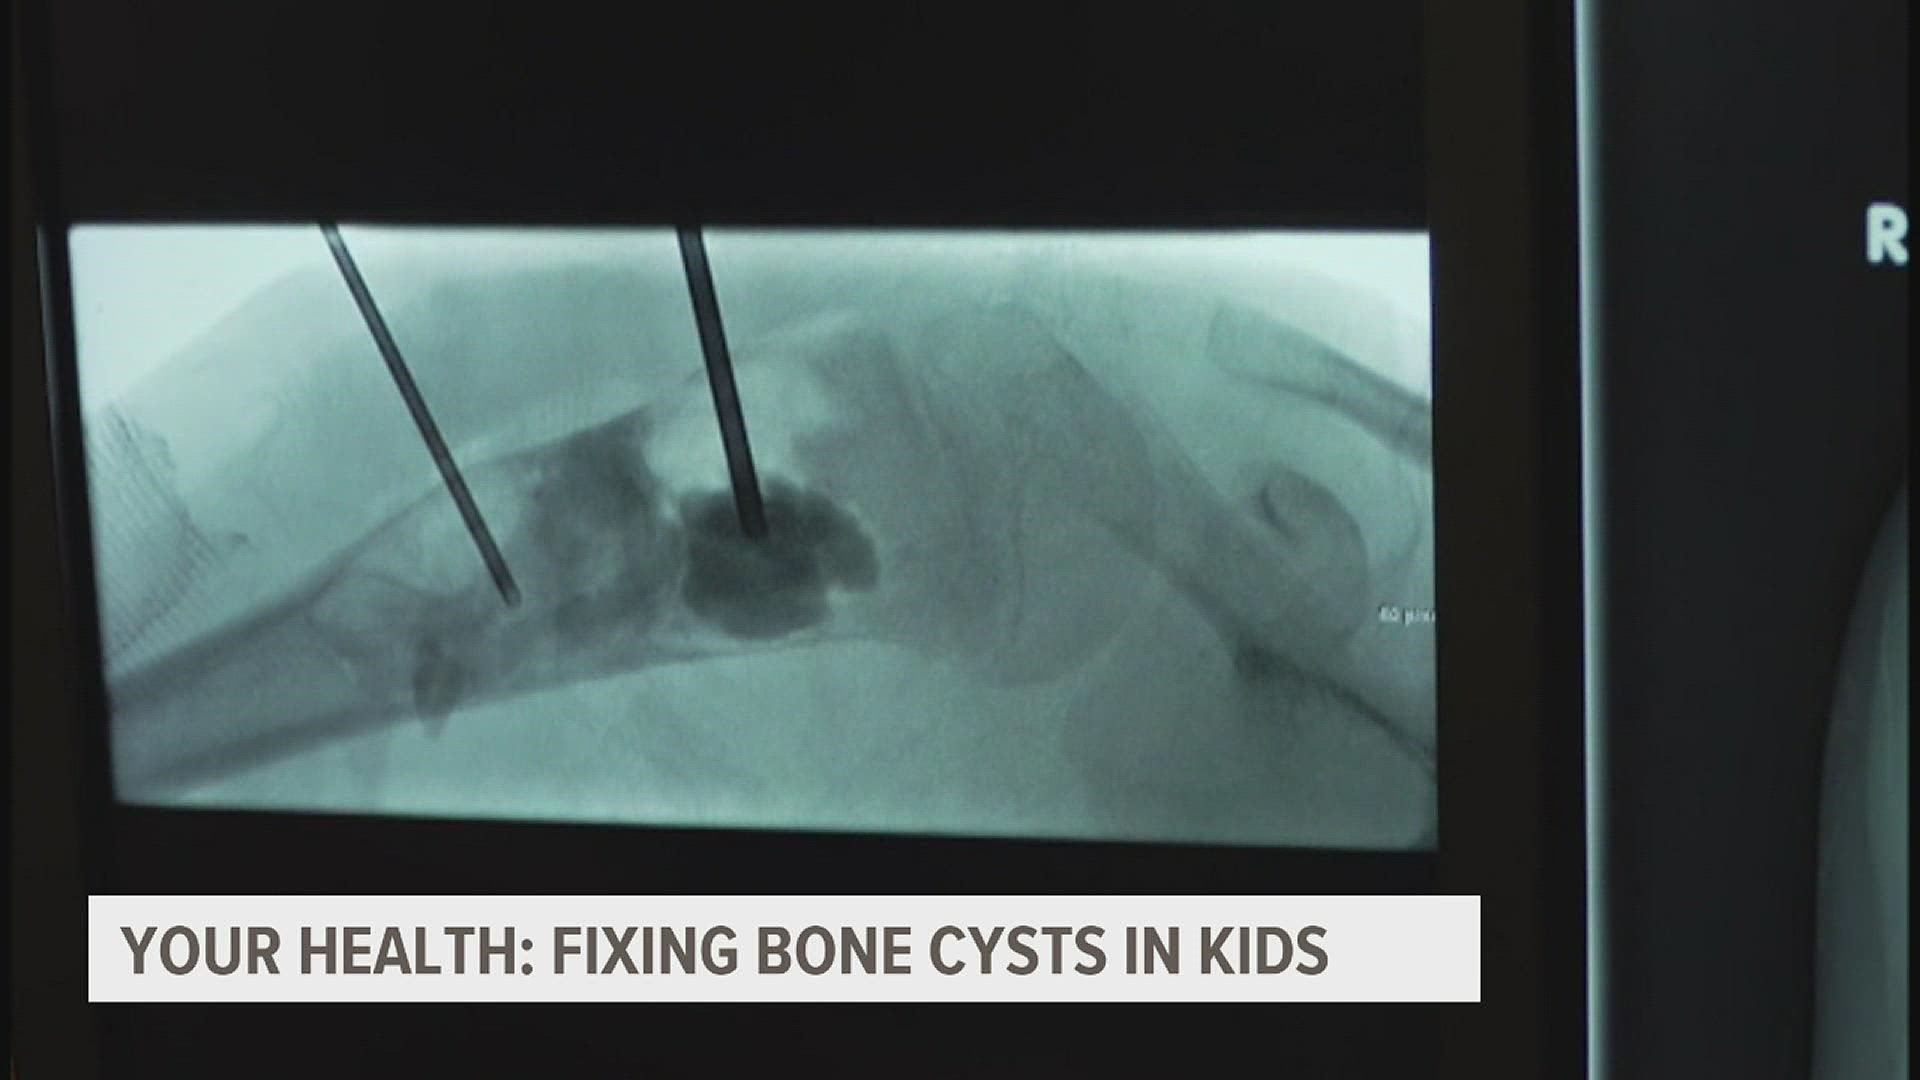 A new technique is helping kids with brittle bones strengthen their skeleton and live normal kid lives.